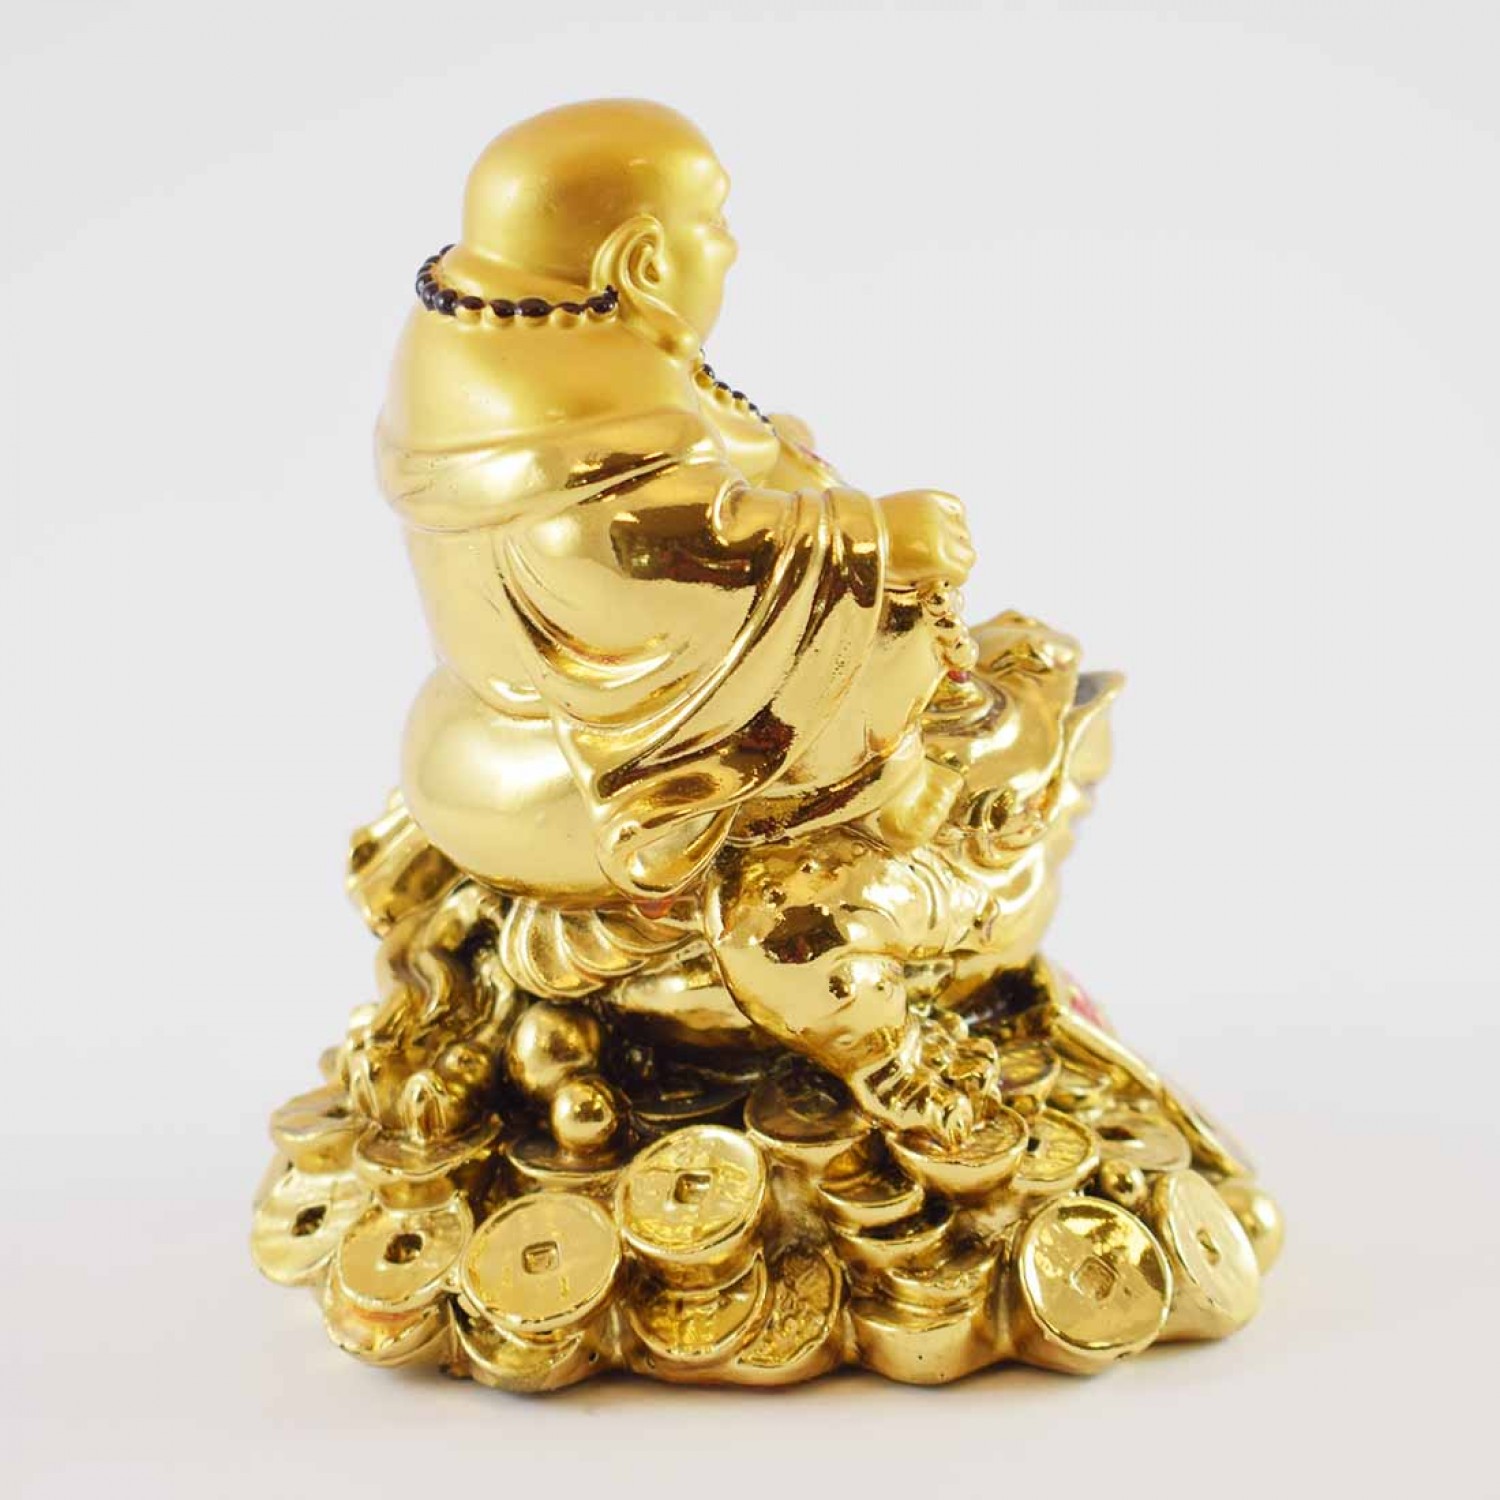 Handmade Golden Laughing Buddha Riding On Money Frog Sitting On A Bed